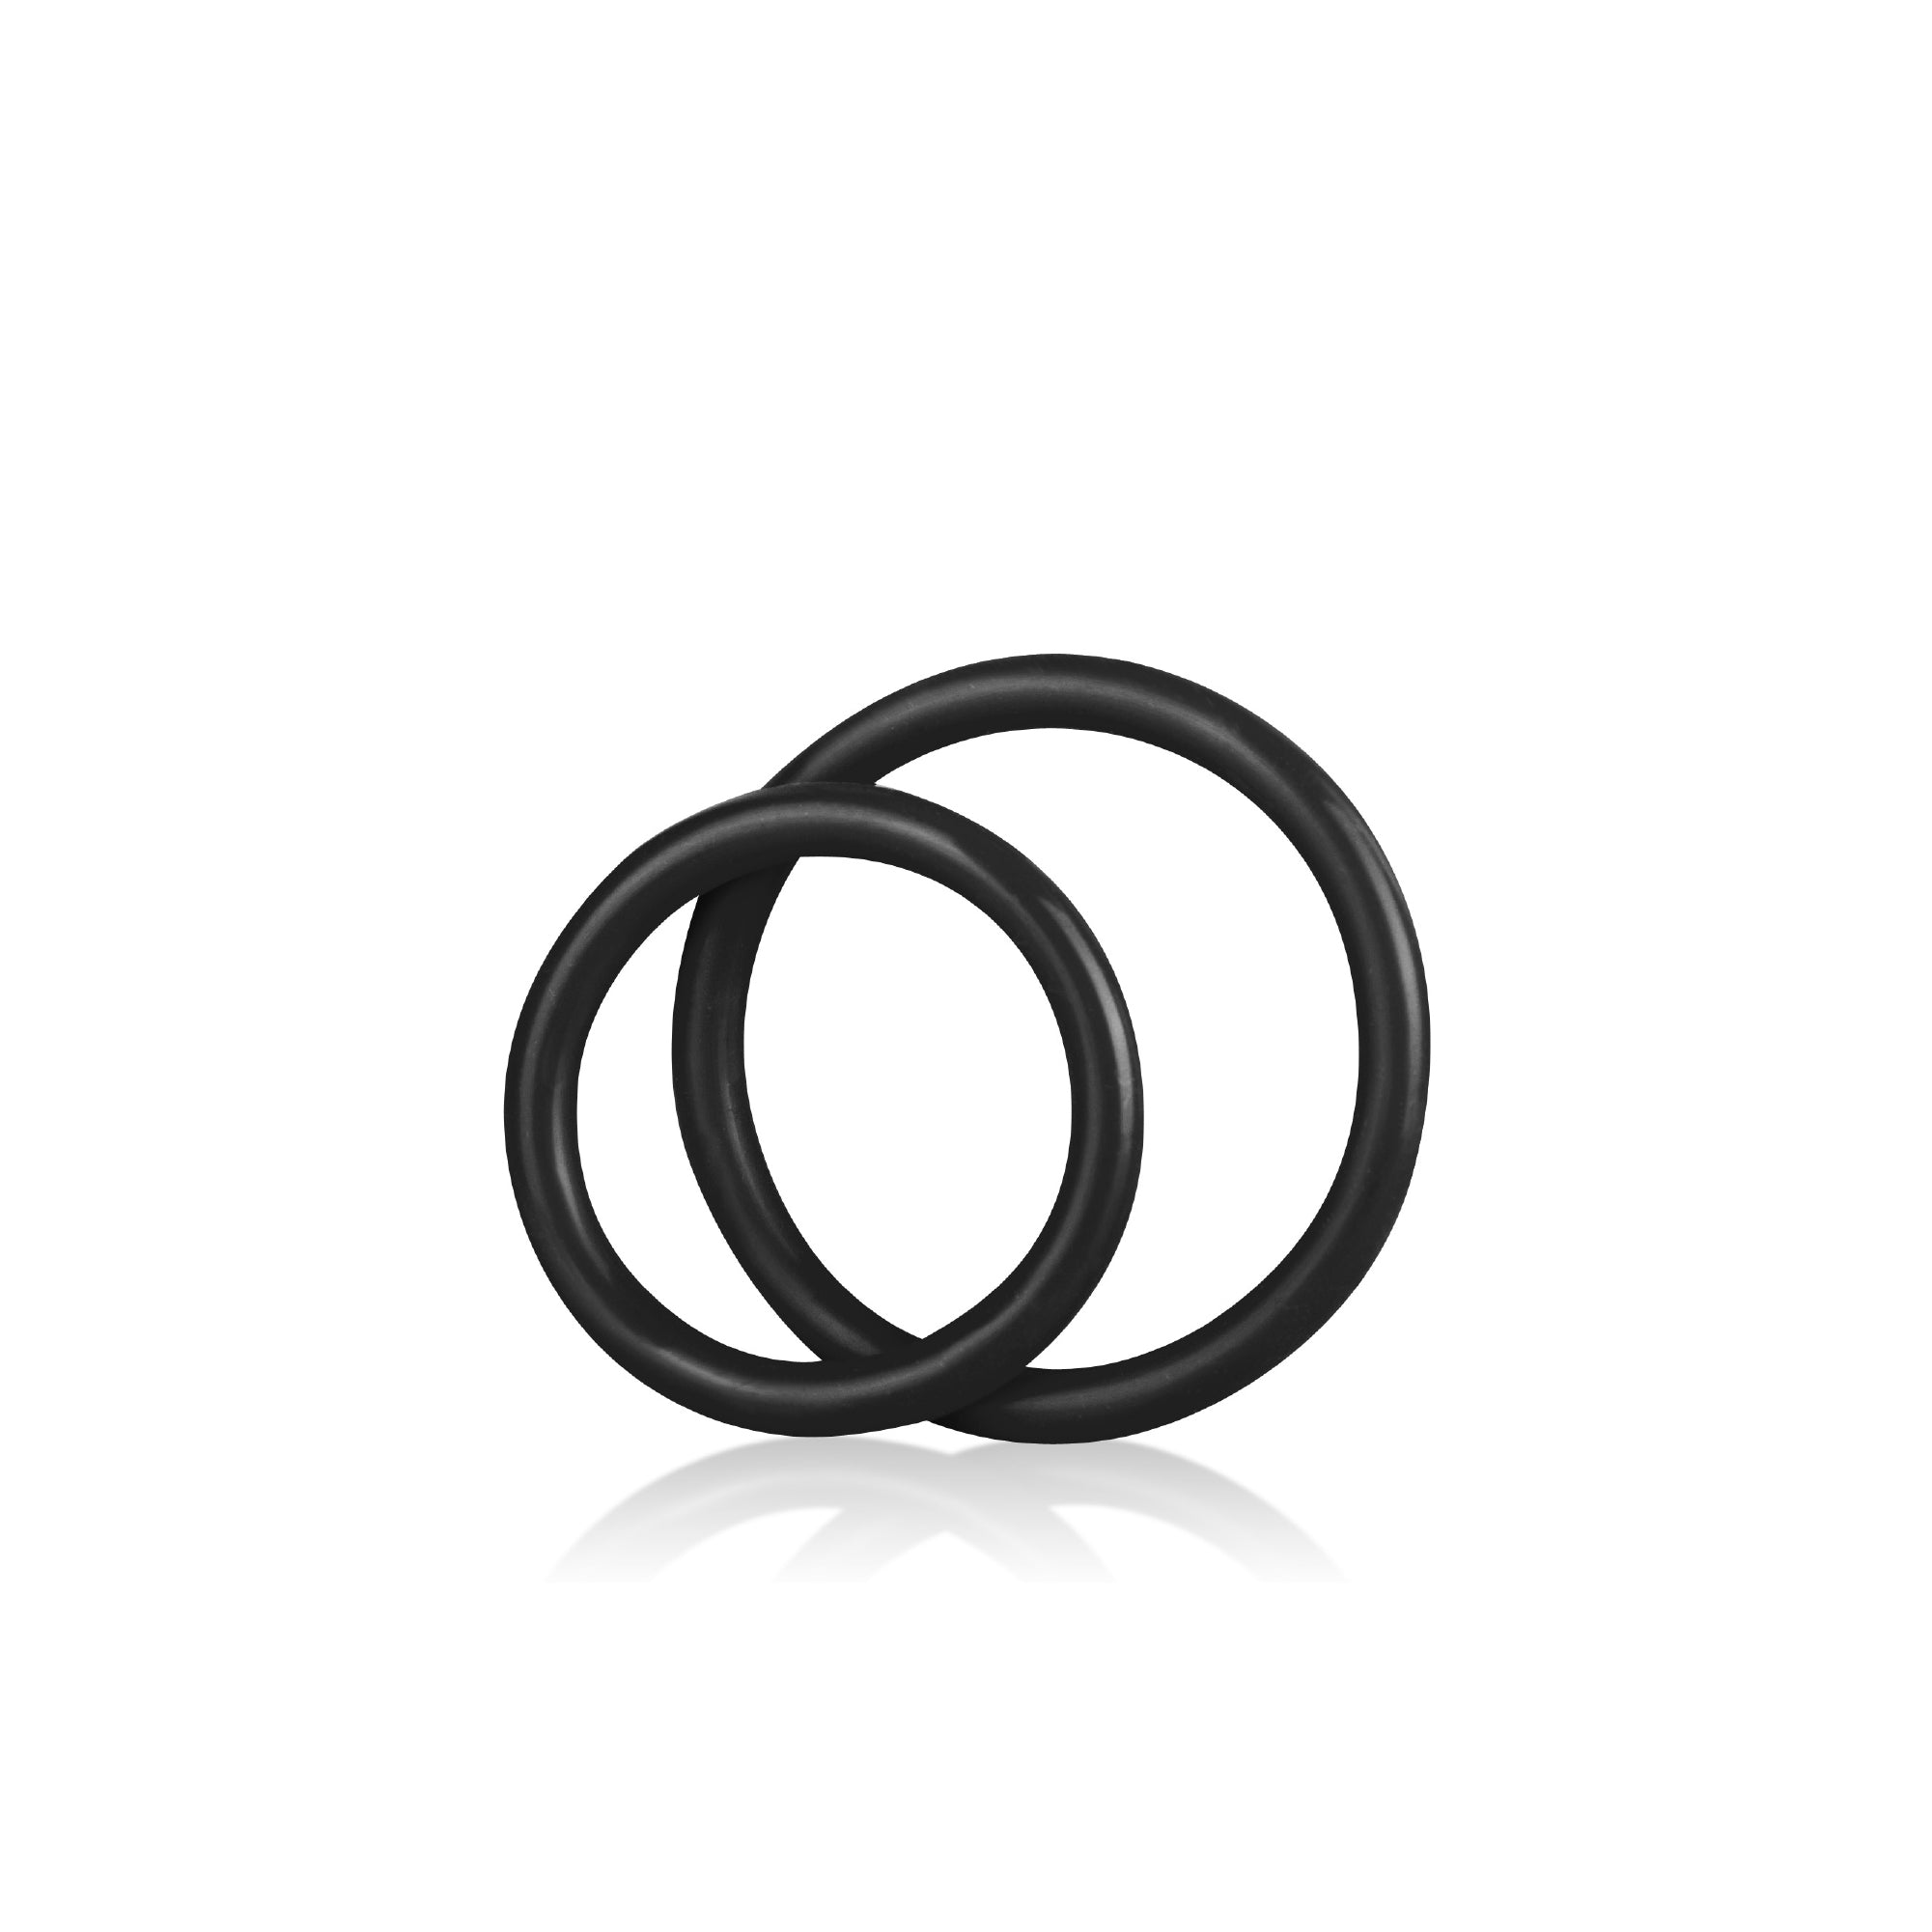 Silicone Cock Ring Set